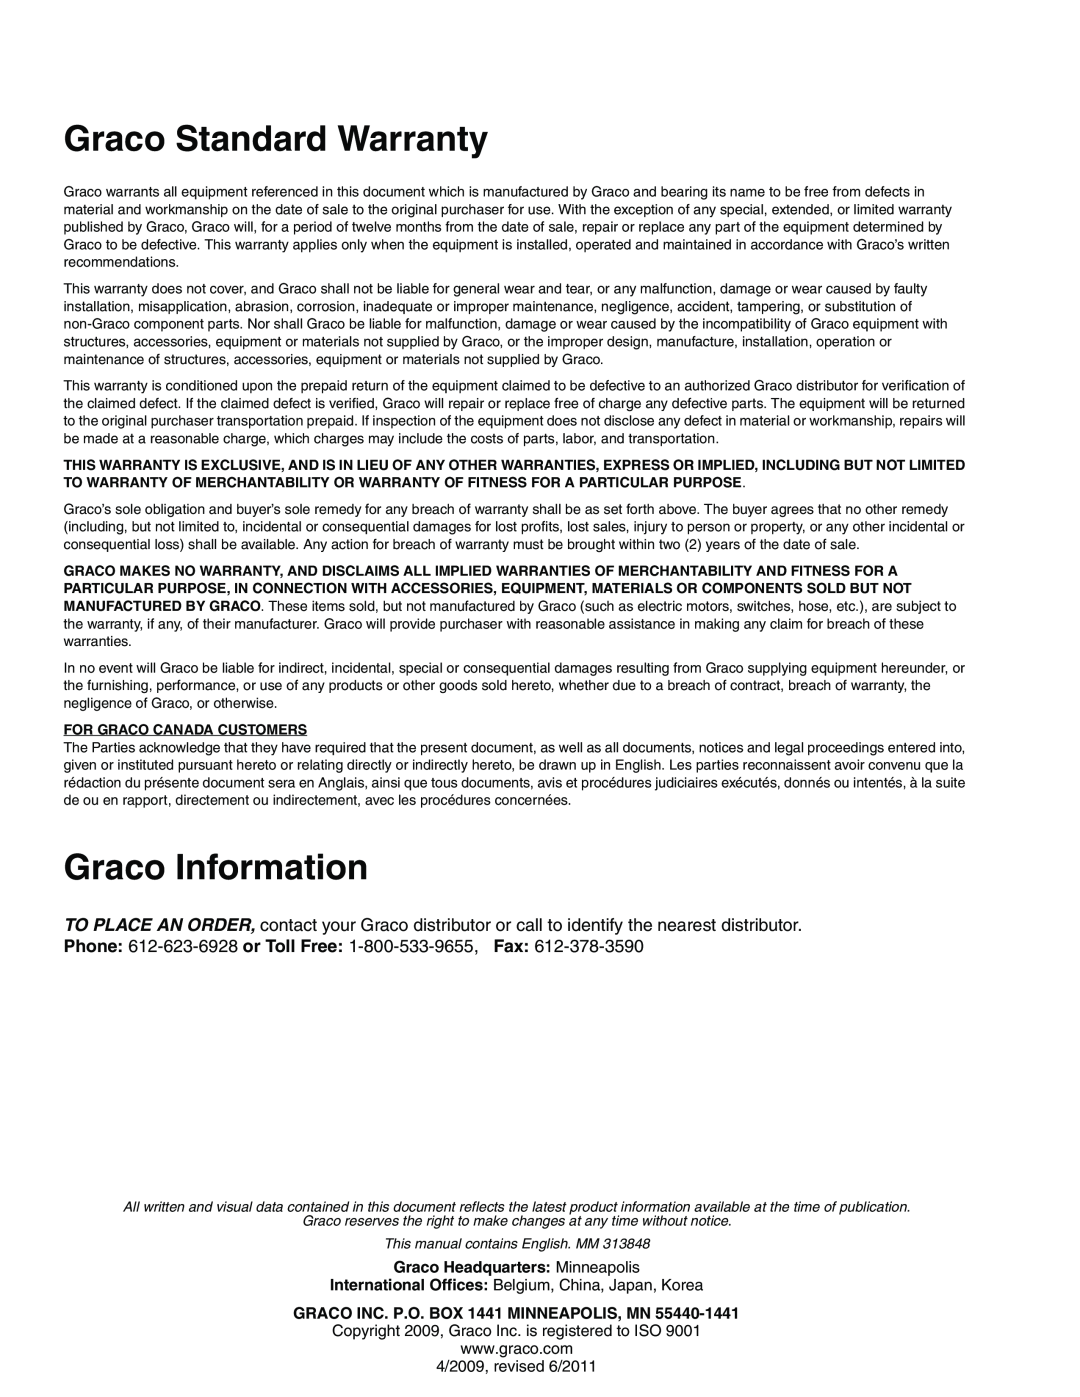 Graco 24J817 Graco Standard Warranty, Graco Information, Graco Headquarters Minneapolis, This manual contains English. MM 